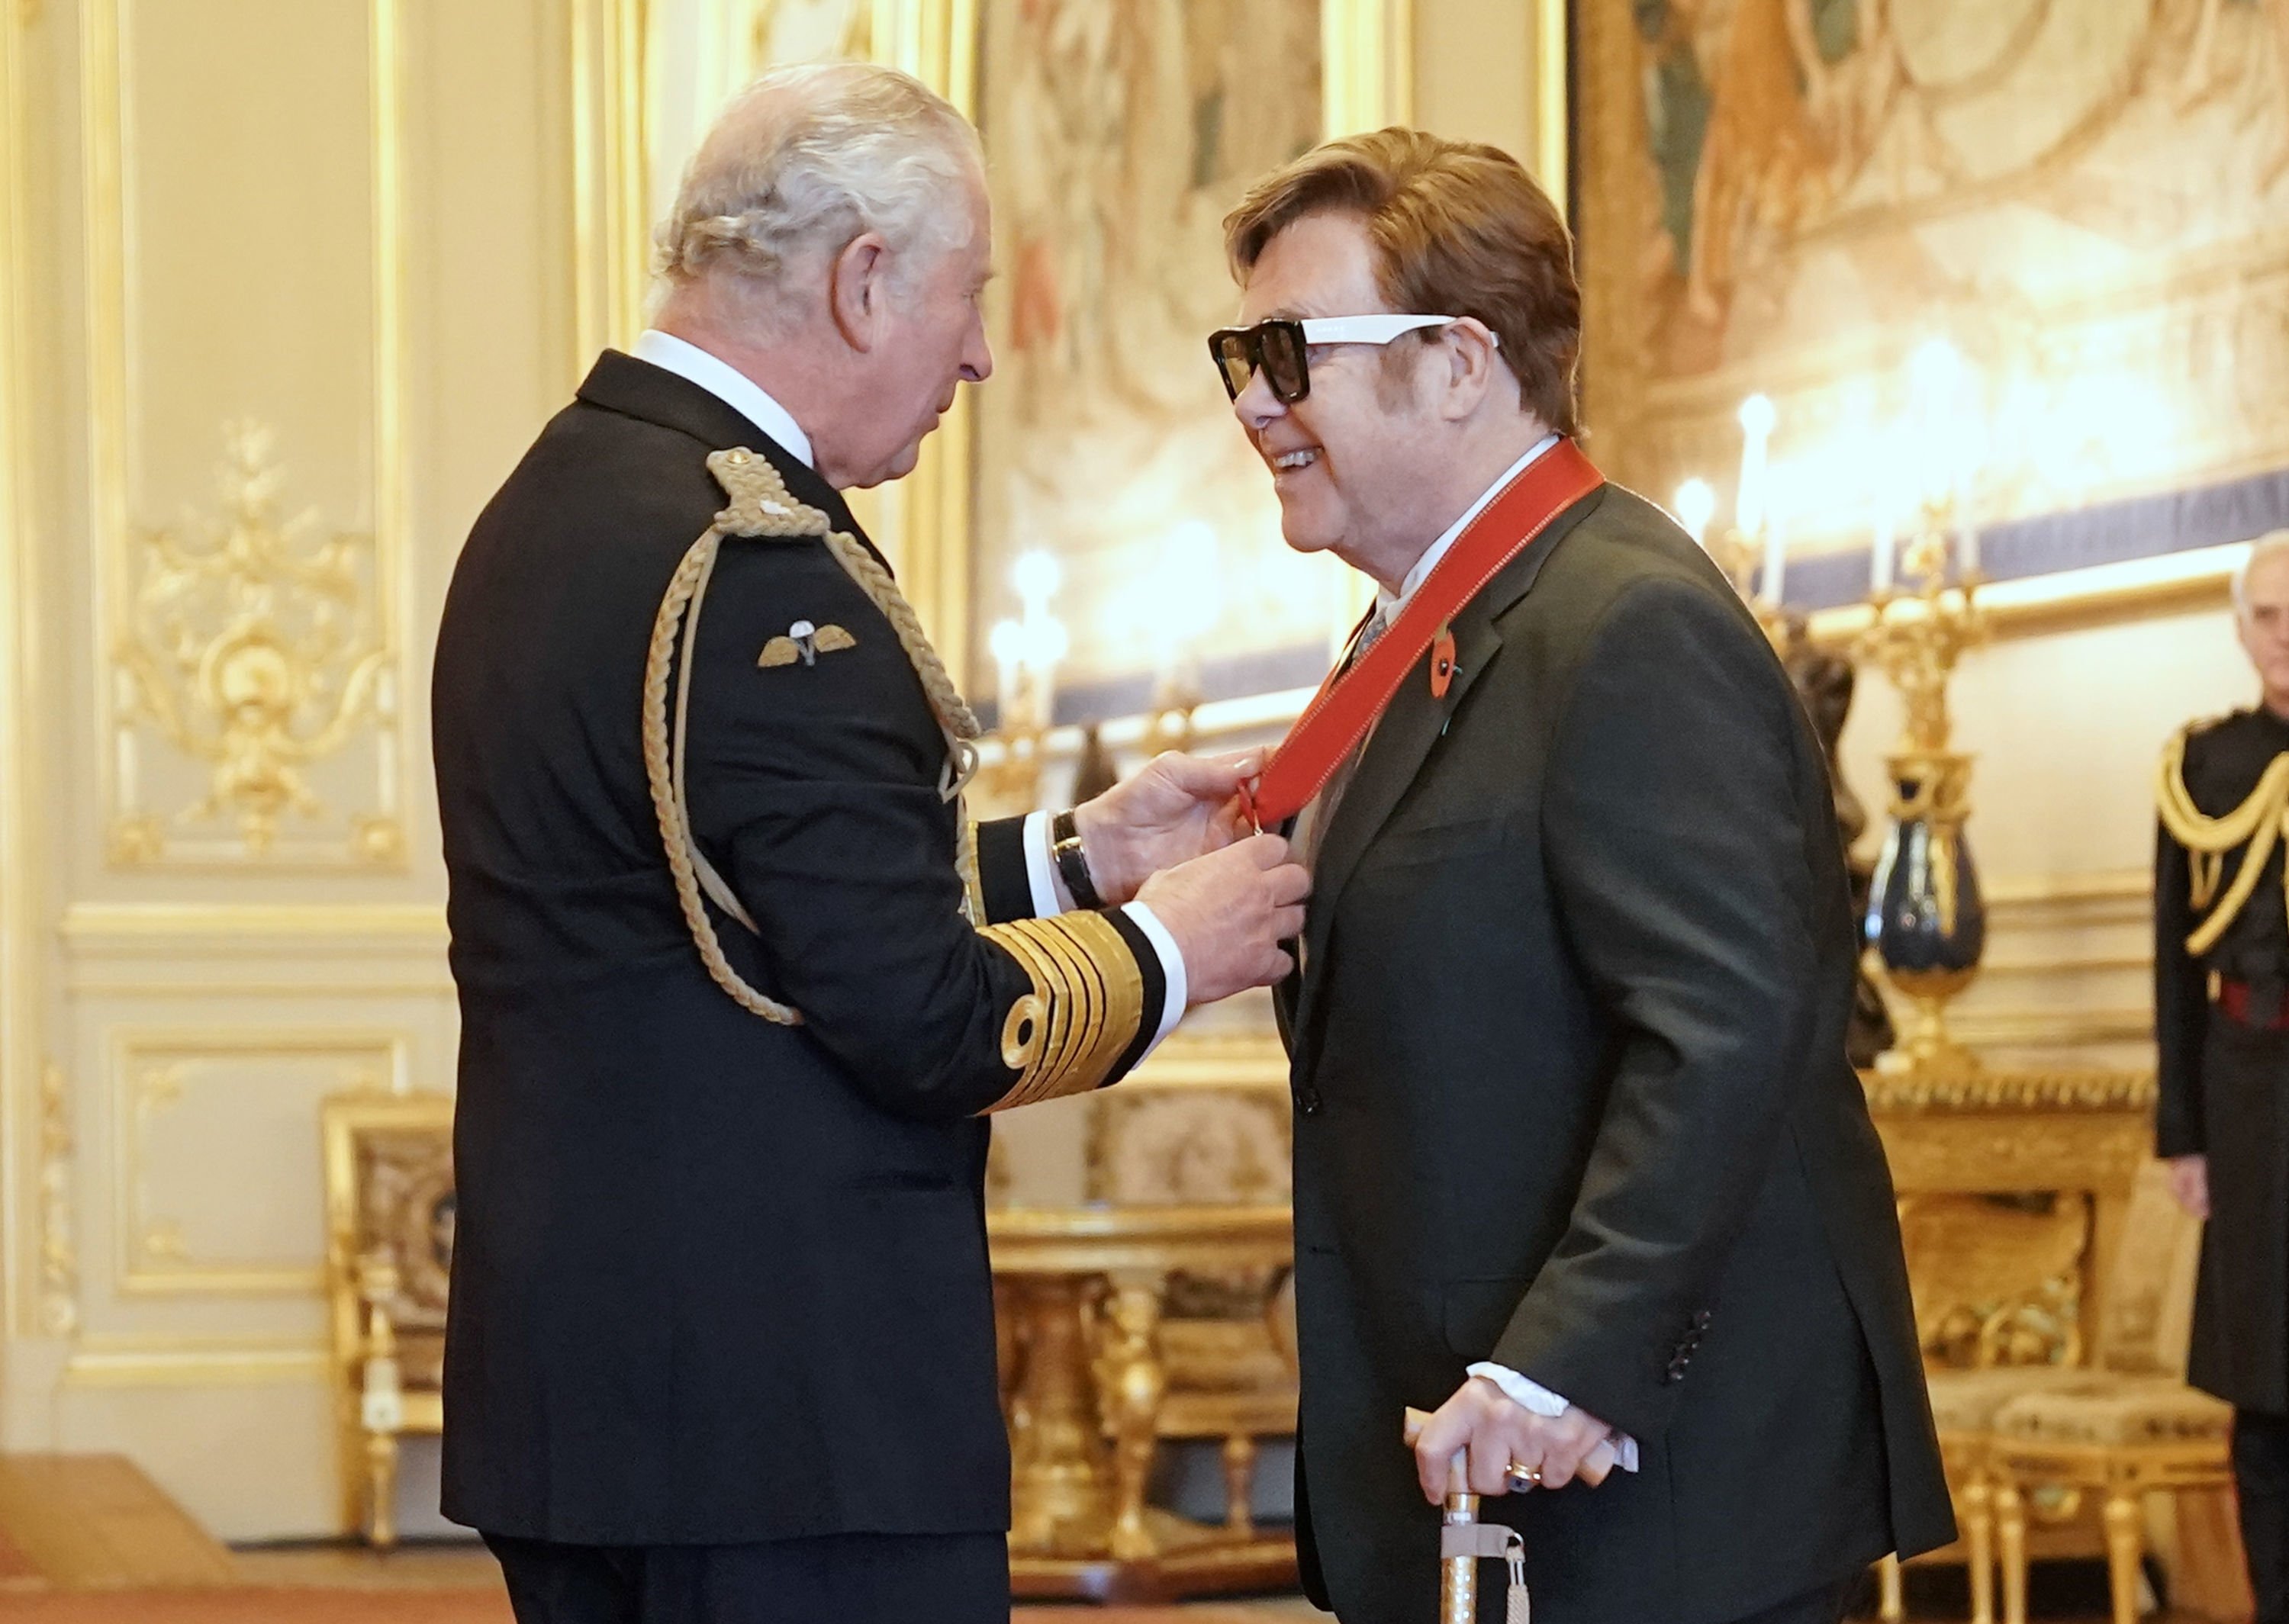 Sir Elton John is made a member of the Order of the Companions of Honour by Prince Charles during an investiture ceremony at Windsor Castle, in Windsor, England, Nov. 10, 2021. (AP)